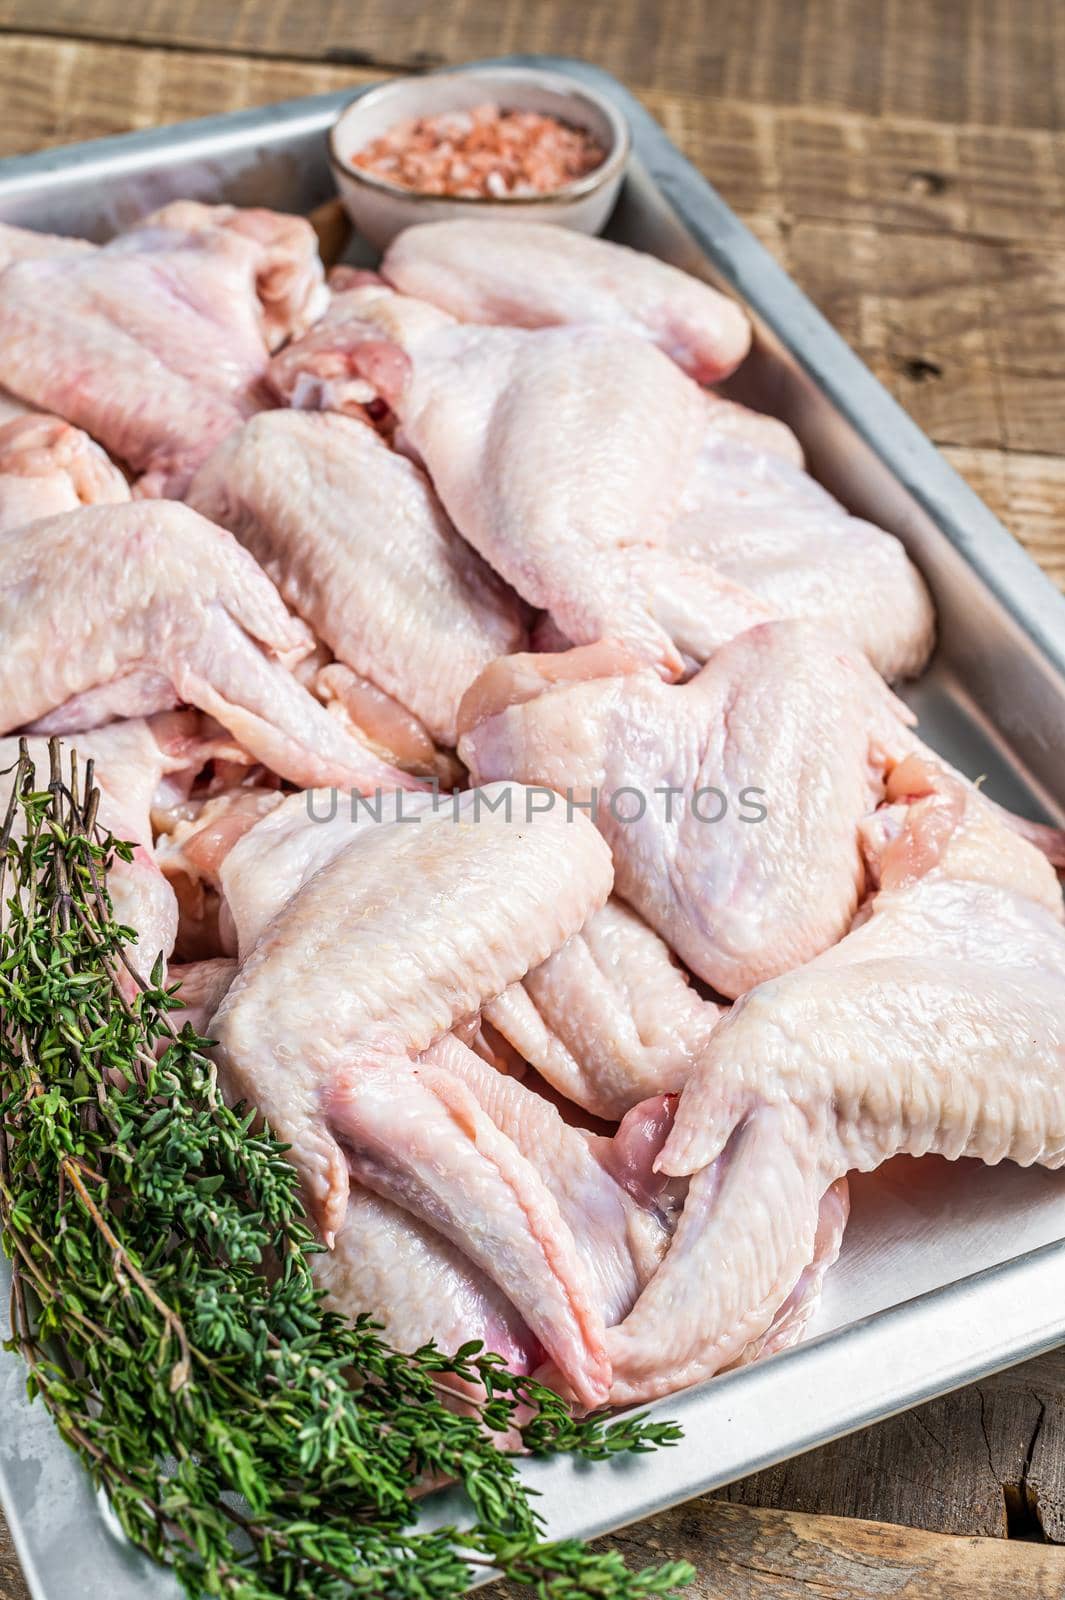 Raw chicken wings Poultry meat ready for cooking with herbs. Wooden background. Top view.